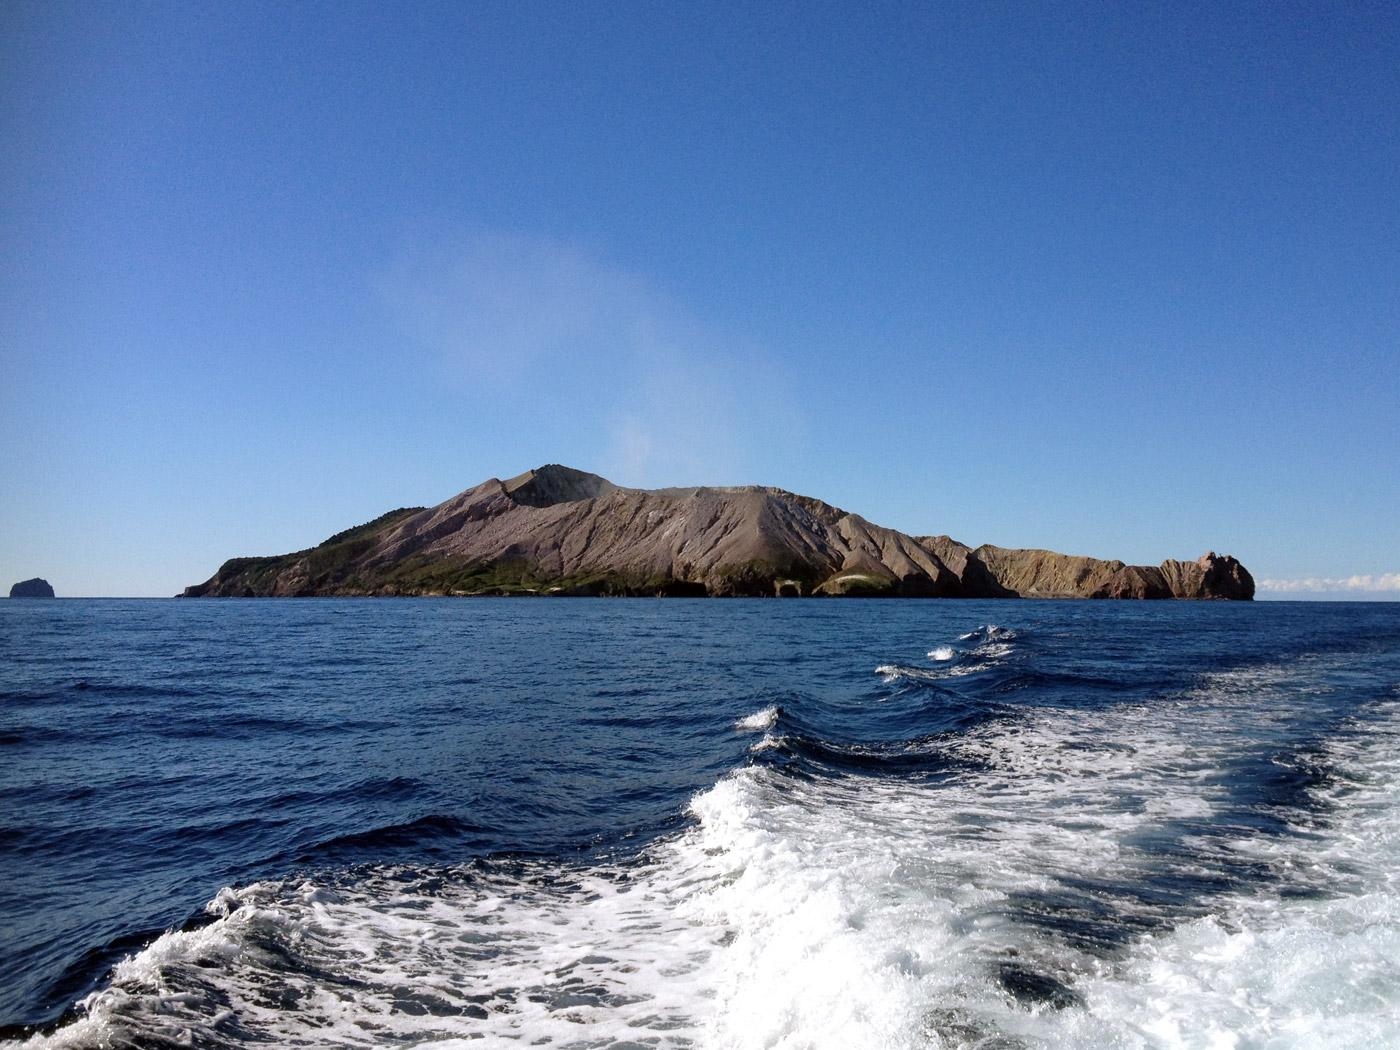 White Island off the coast of New Zealand, which acts as a natural laboratory to study the effects of ocean acidification on temperate reefs. Image credit: Ericka Coni